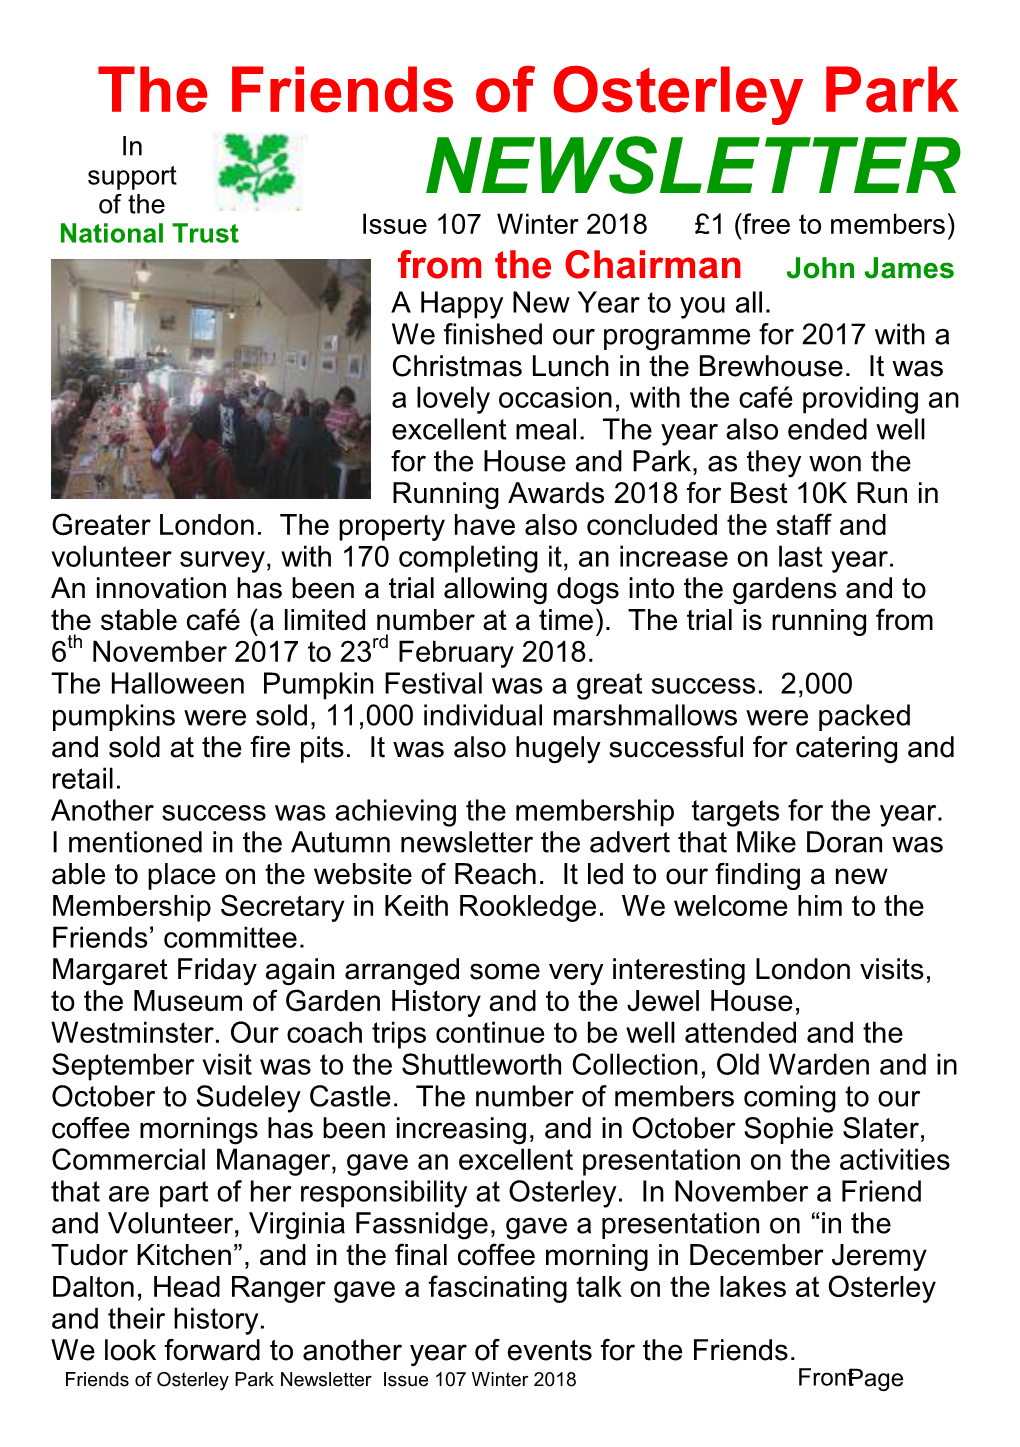 NEWSLETTER National Trust Issue 107 Winter 2018 £1 (Free to Members) from the Chairman John James a Happy New Year to You All